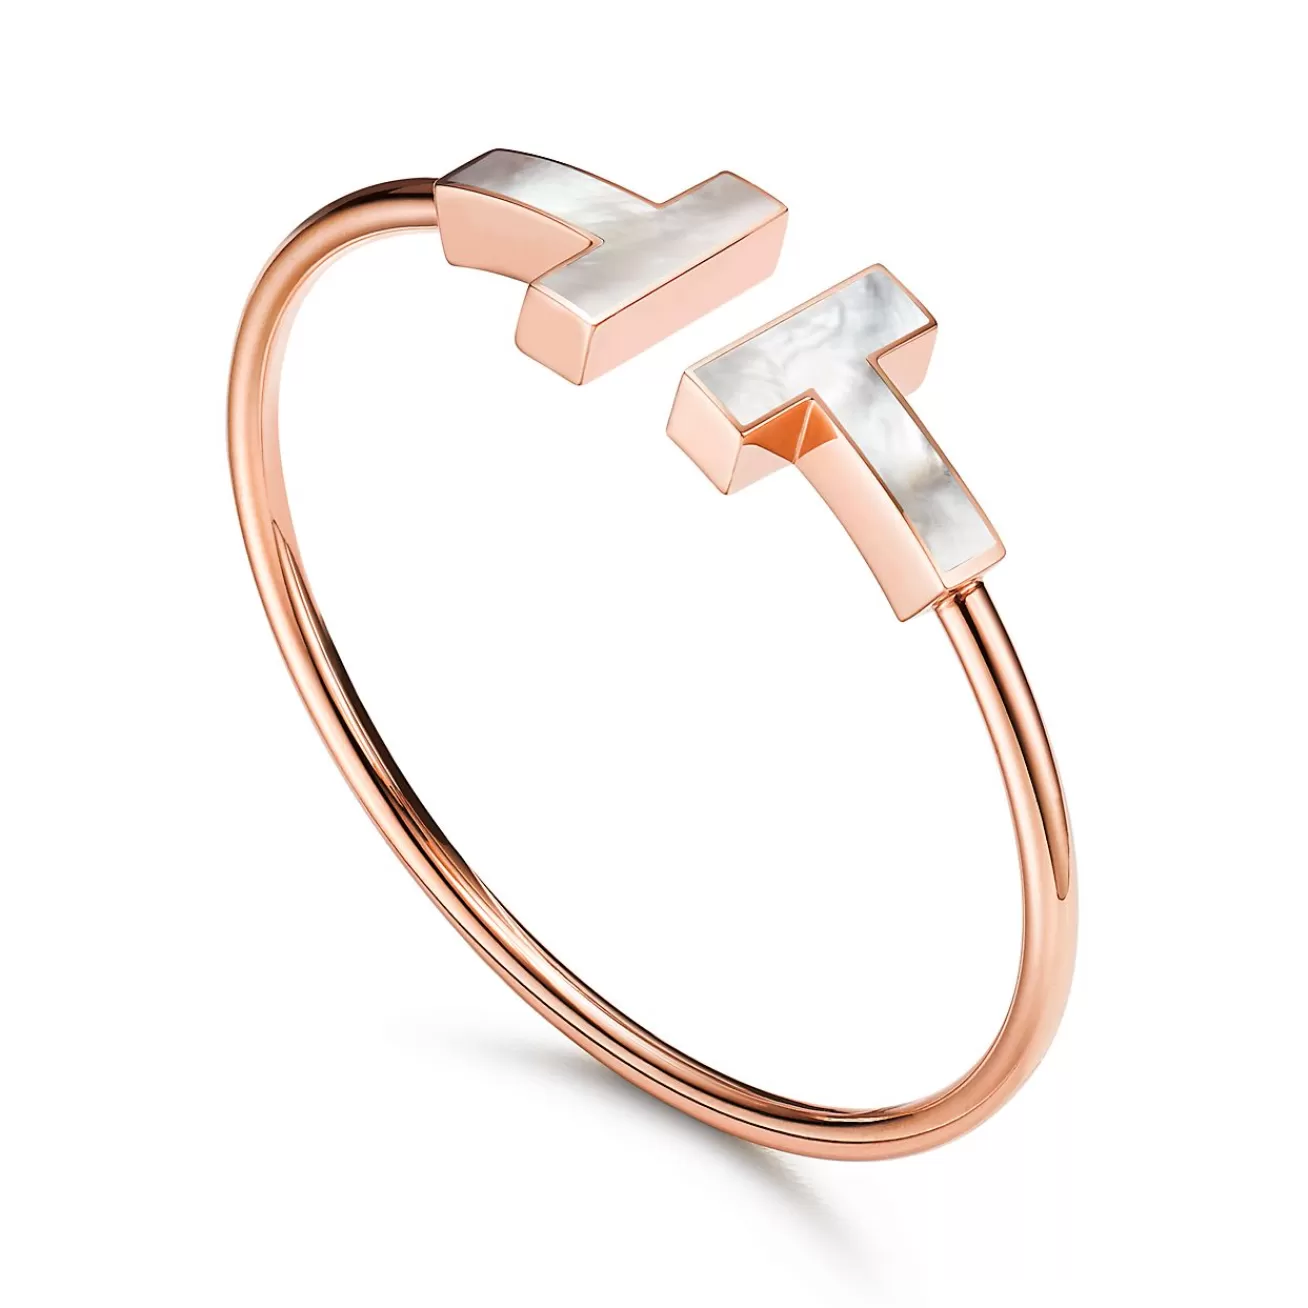 Tiffany & Co. Tiffany T Wire Bracelet in Rose Gold with Mother-of-pearl, Wide | ^ Bracelets | Rose Gold Jewelry